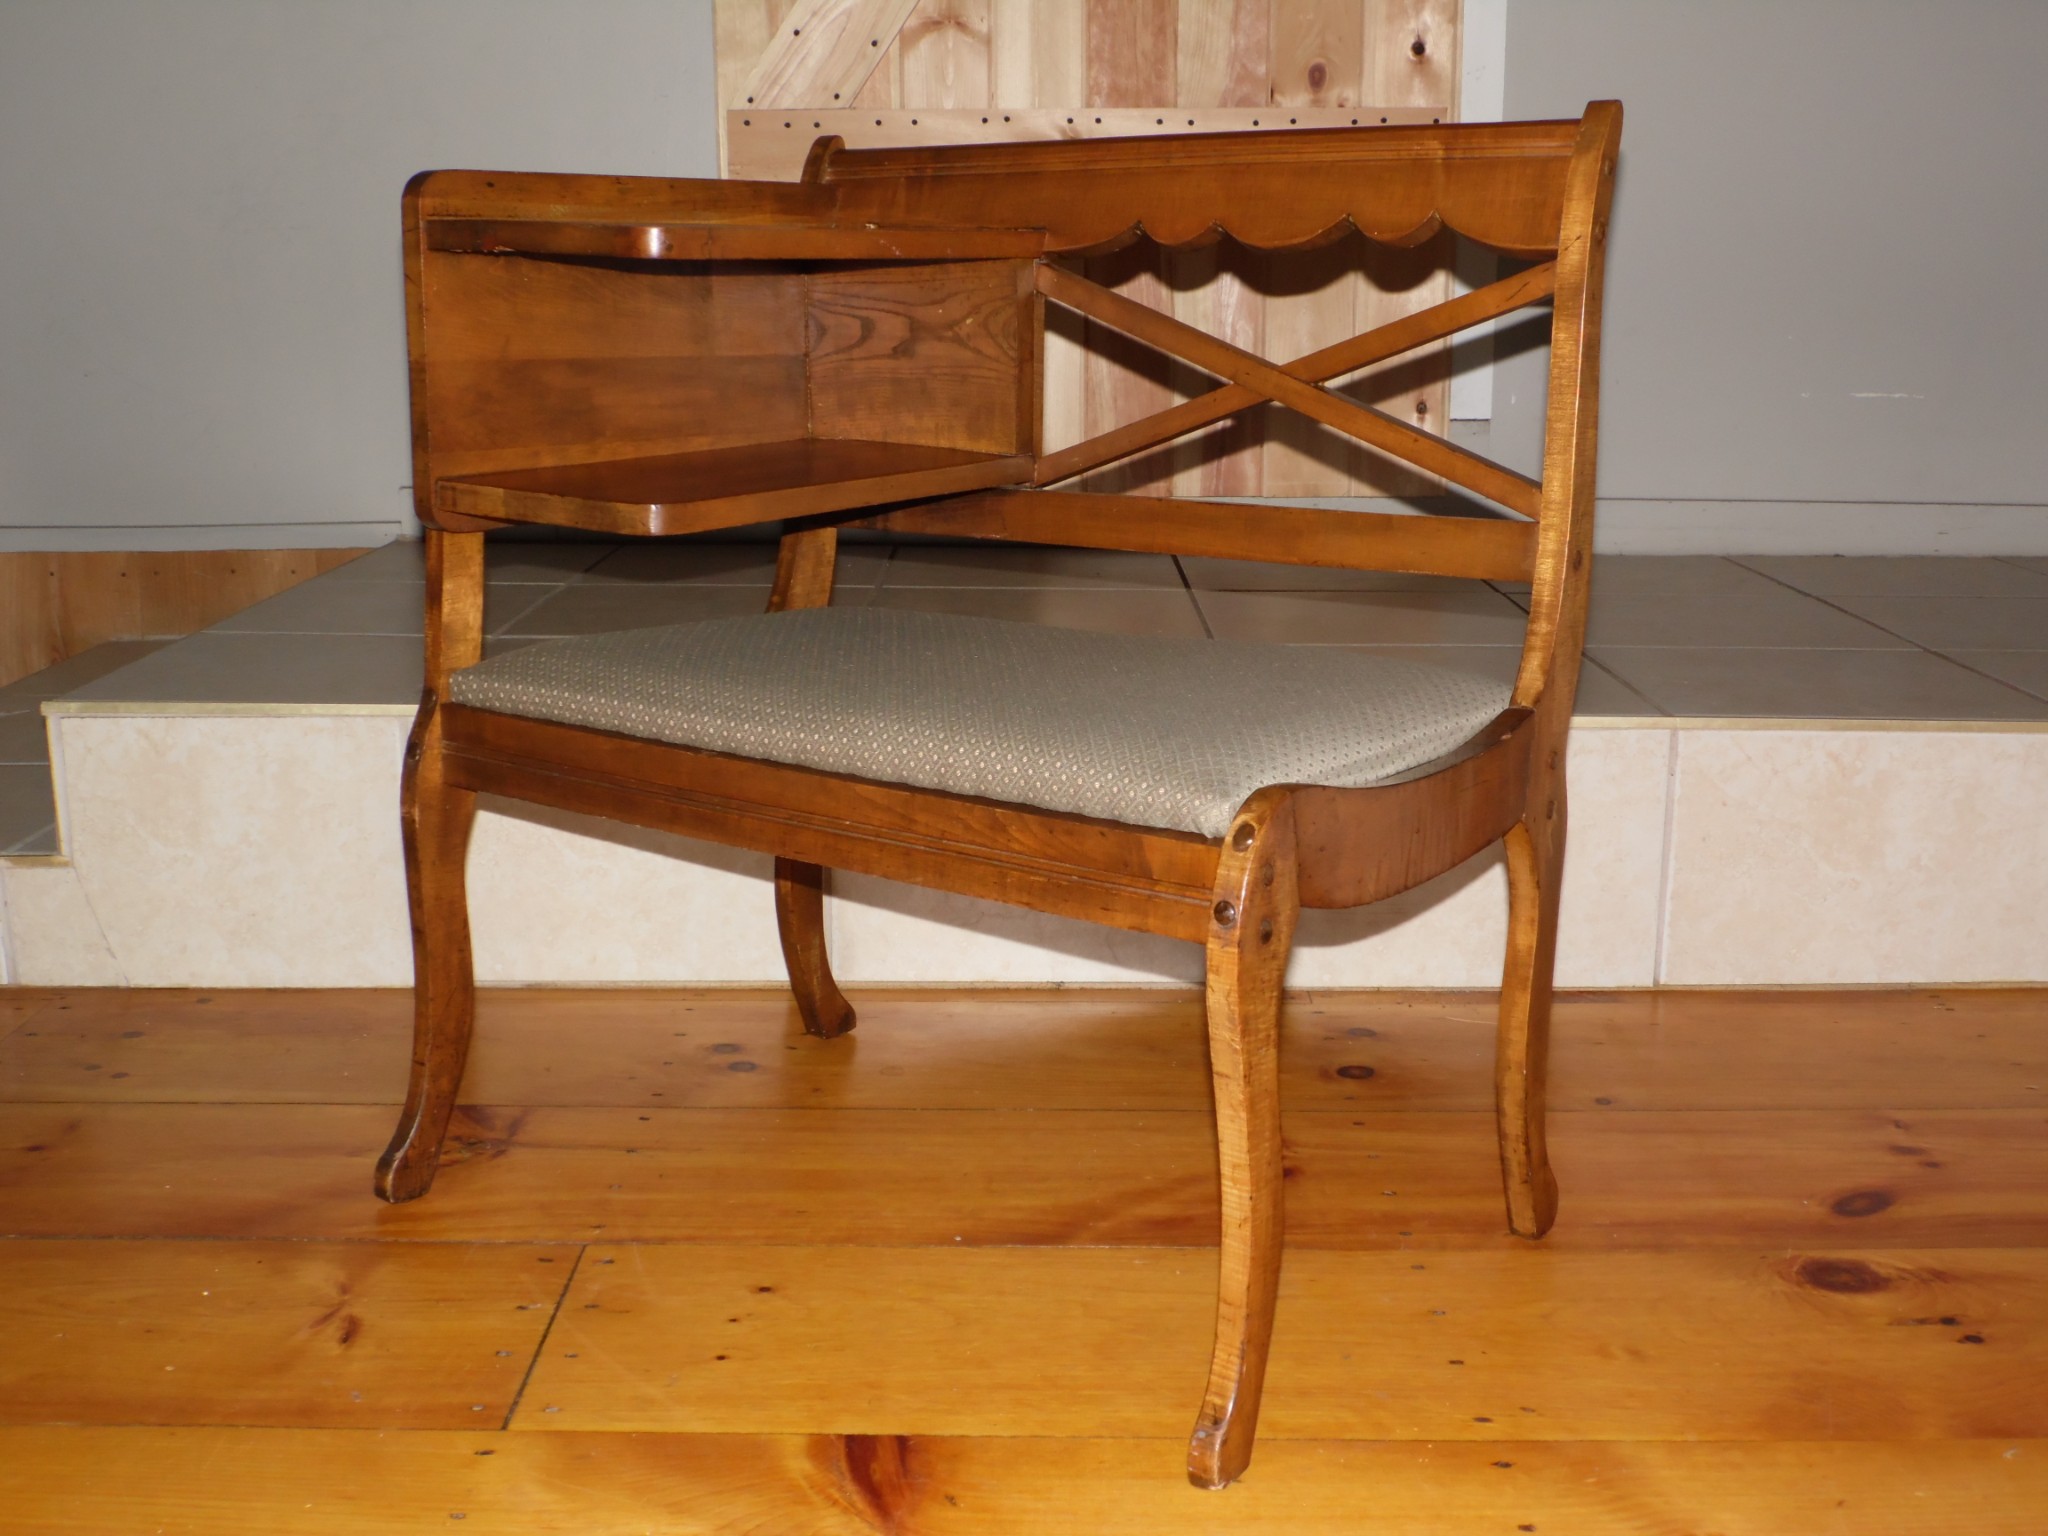 Vintage Gossip Bench Telephone Table Entry Bench Chair Ebay